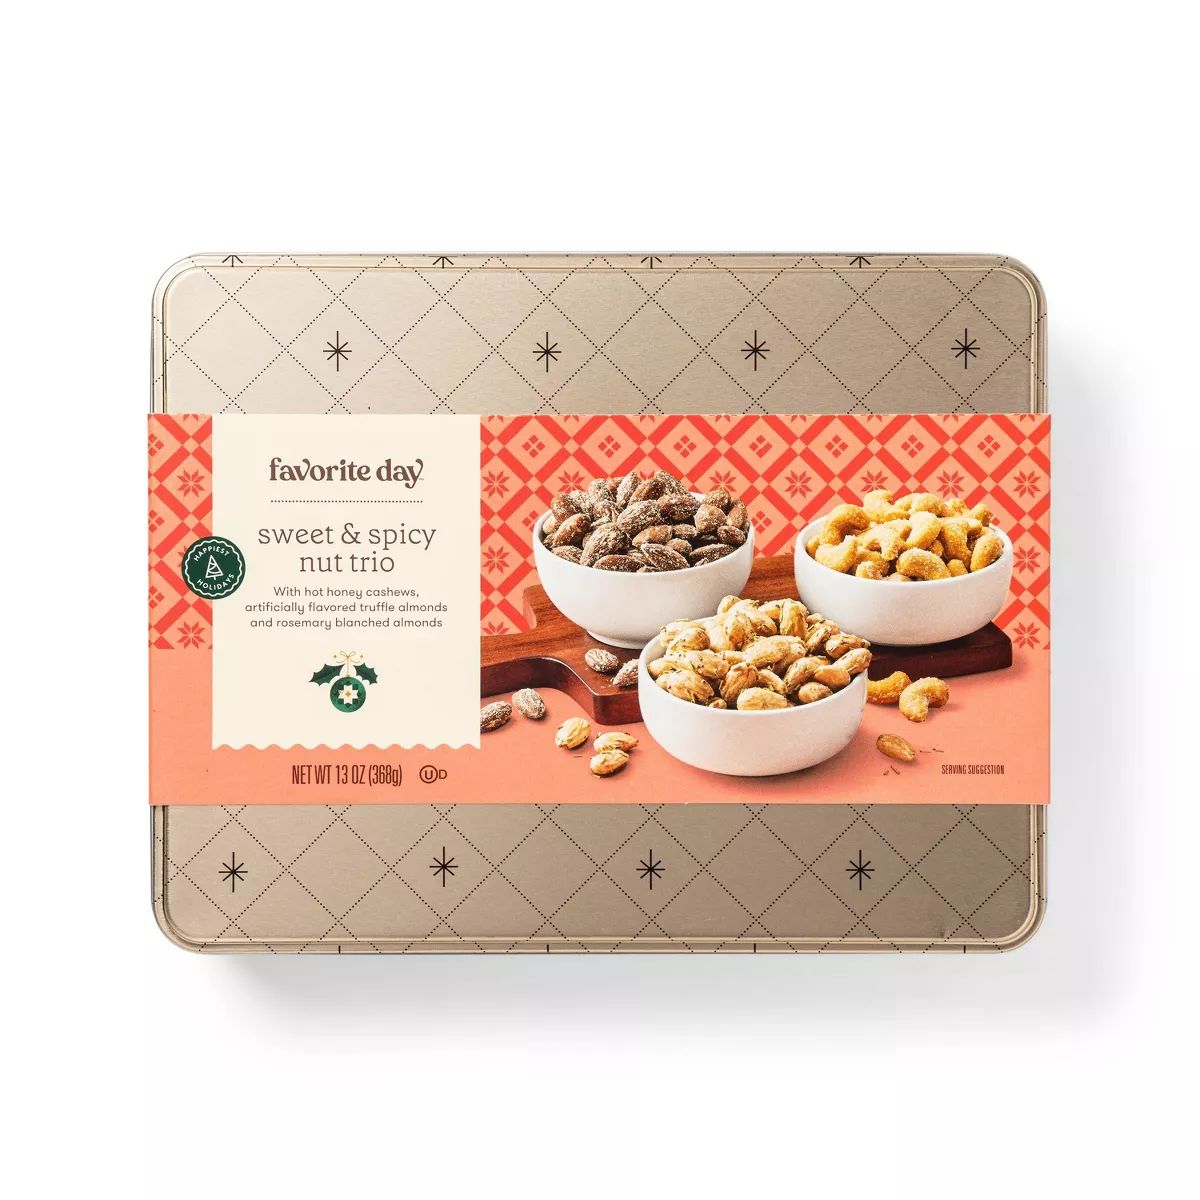 Holiday Sweet & Spicy Nut Trio Tin - 13.0oz. - Favorite Day™ | Target